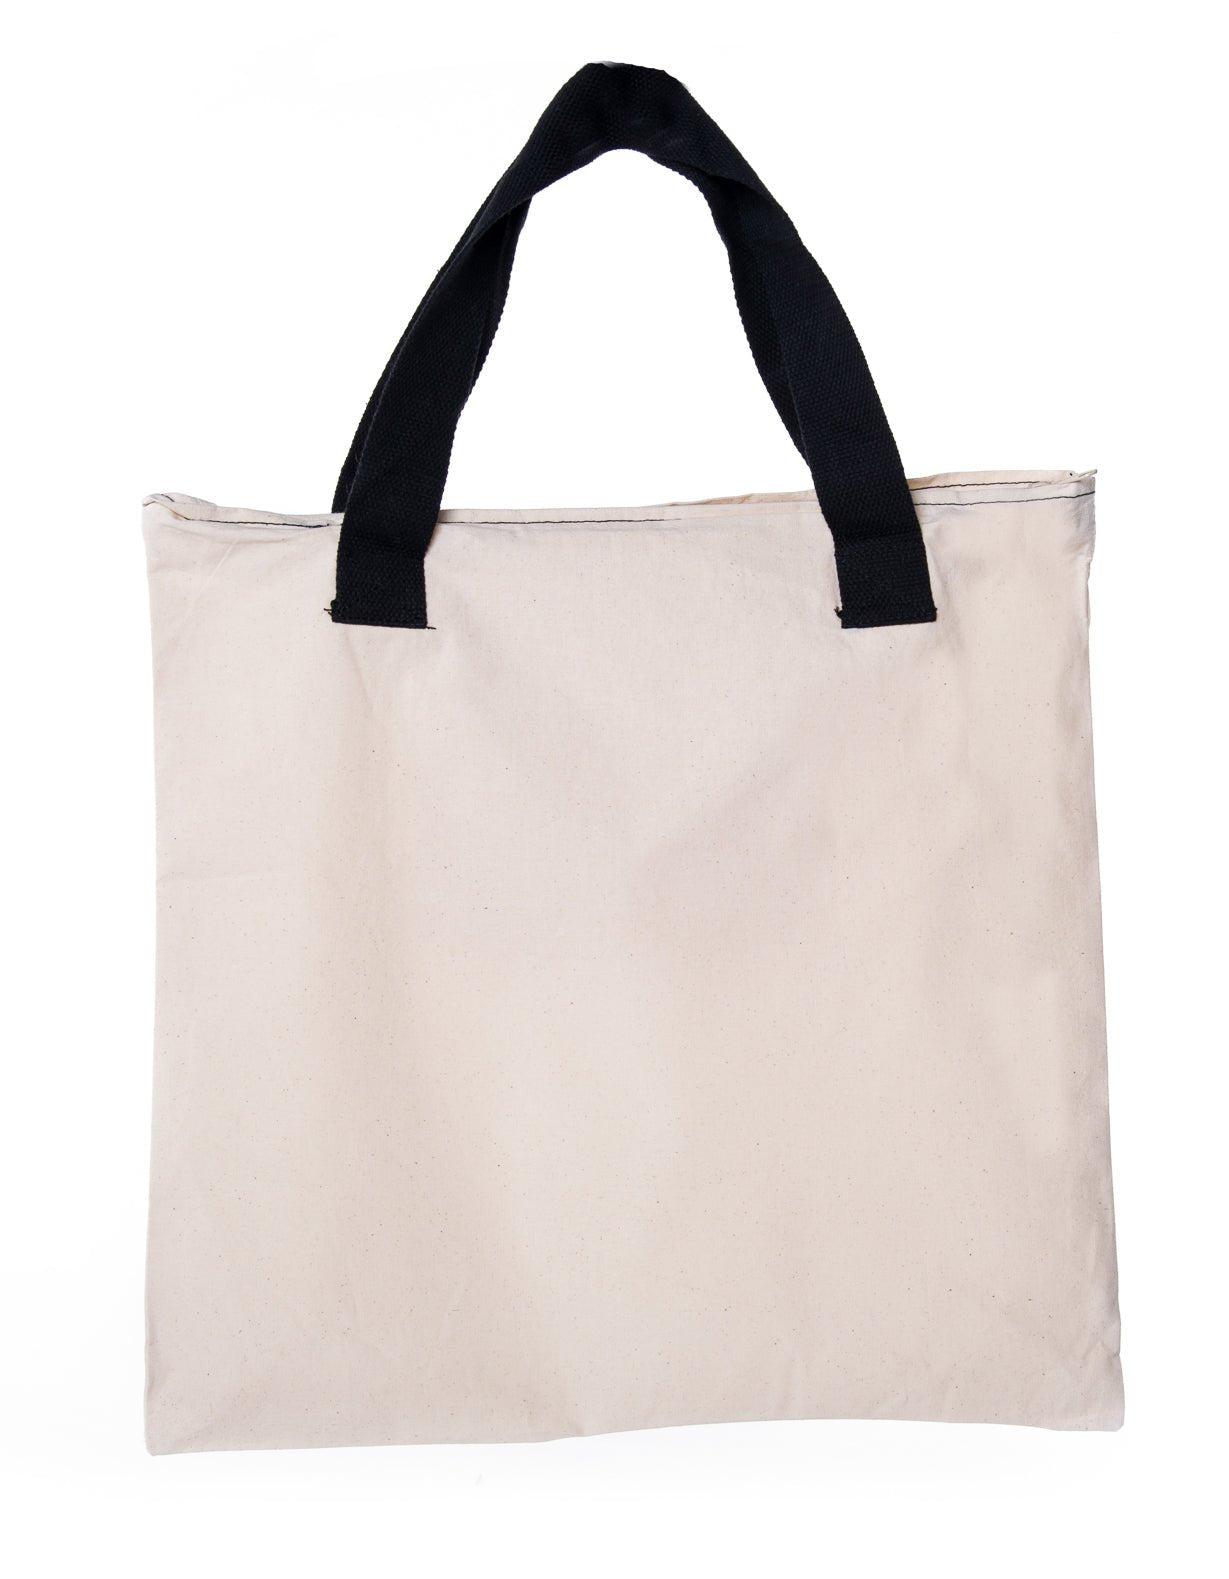 Black Canvas Tote Bag With Zipper, Natural 100% Cotton Black Blank